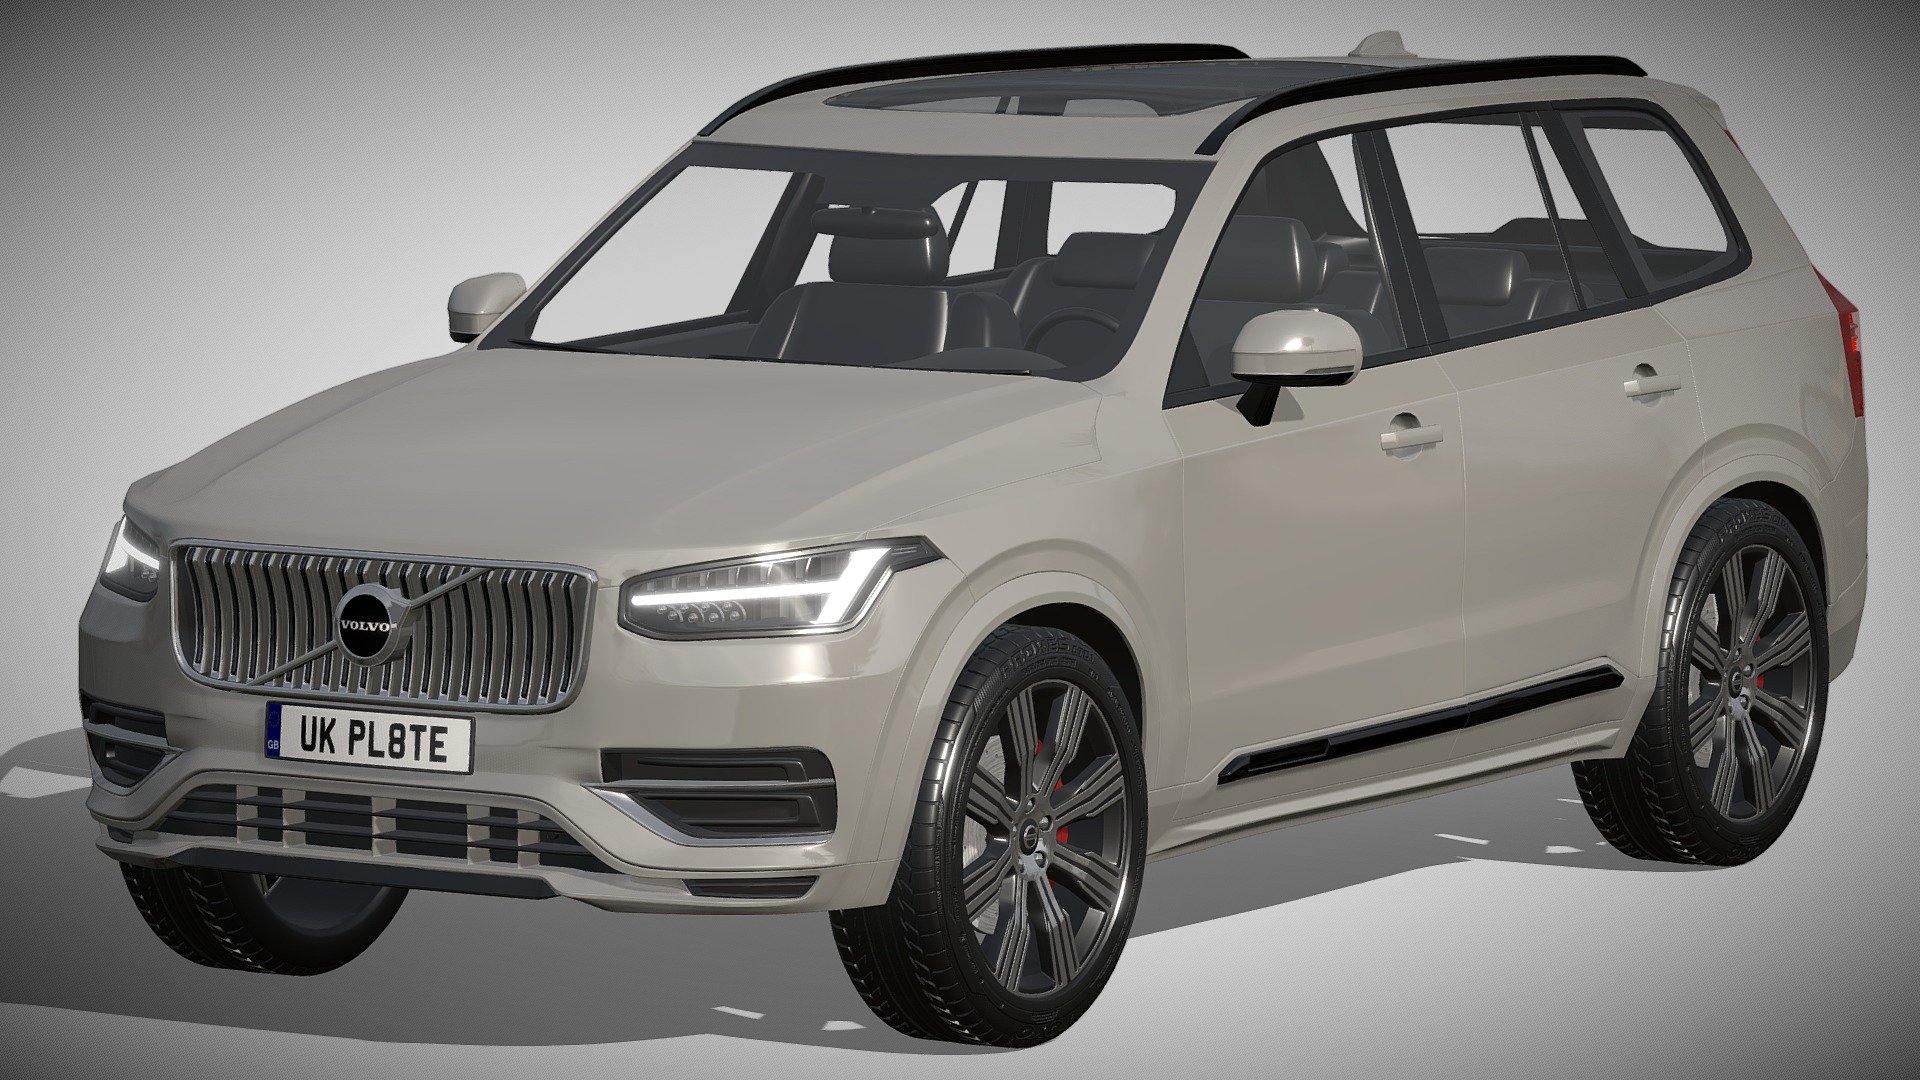 Volvo XC90

https://www.volvocars.com/ru/v/cars/xc90

Clean geometry Light weight model, yet completely detailed for HI-Res renders. Use for movies, Advertisements or games

Corona render and materials

All textures include in *.rar files

Lighting setup is not included in the file! - Volvo XC90 - Buy Royalty Free 3D model by zifir3d 3d model